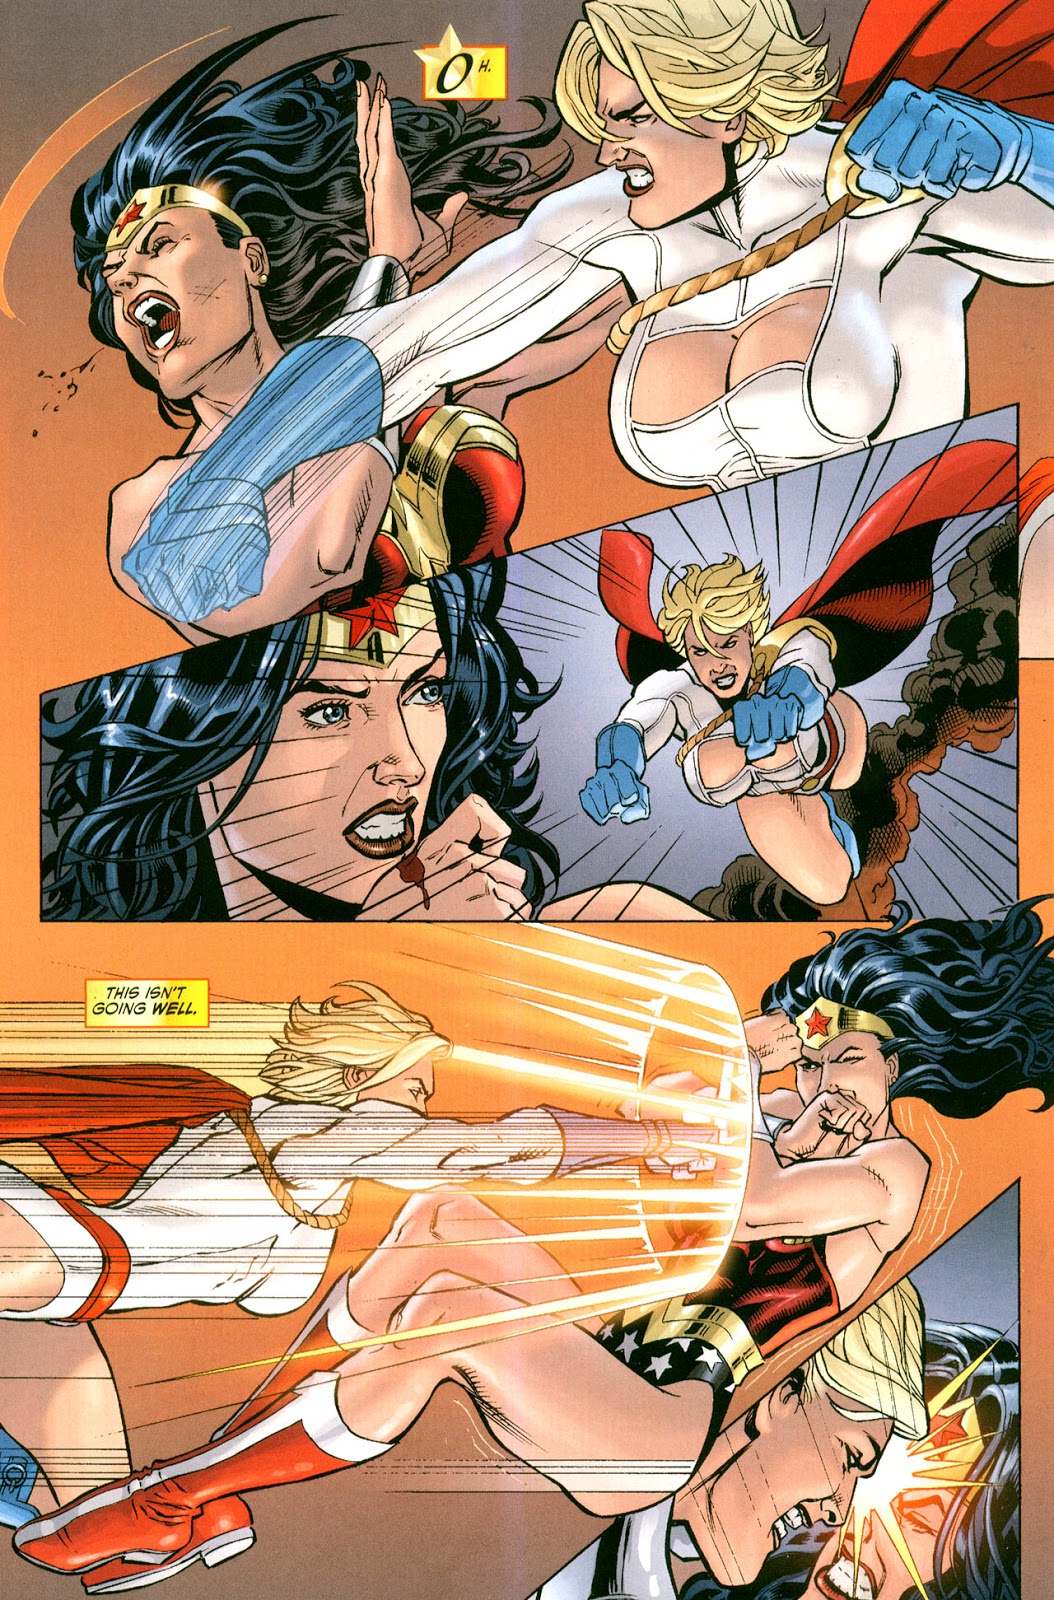 In 'Wonder Woman' (2010) #41, Power Girl possessed by the Children Of Ares punches Wonder Woman who bleeds.